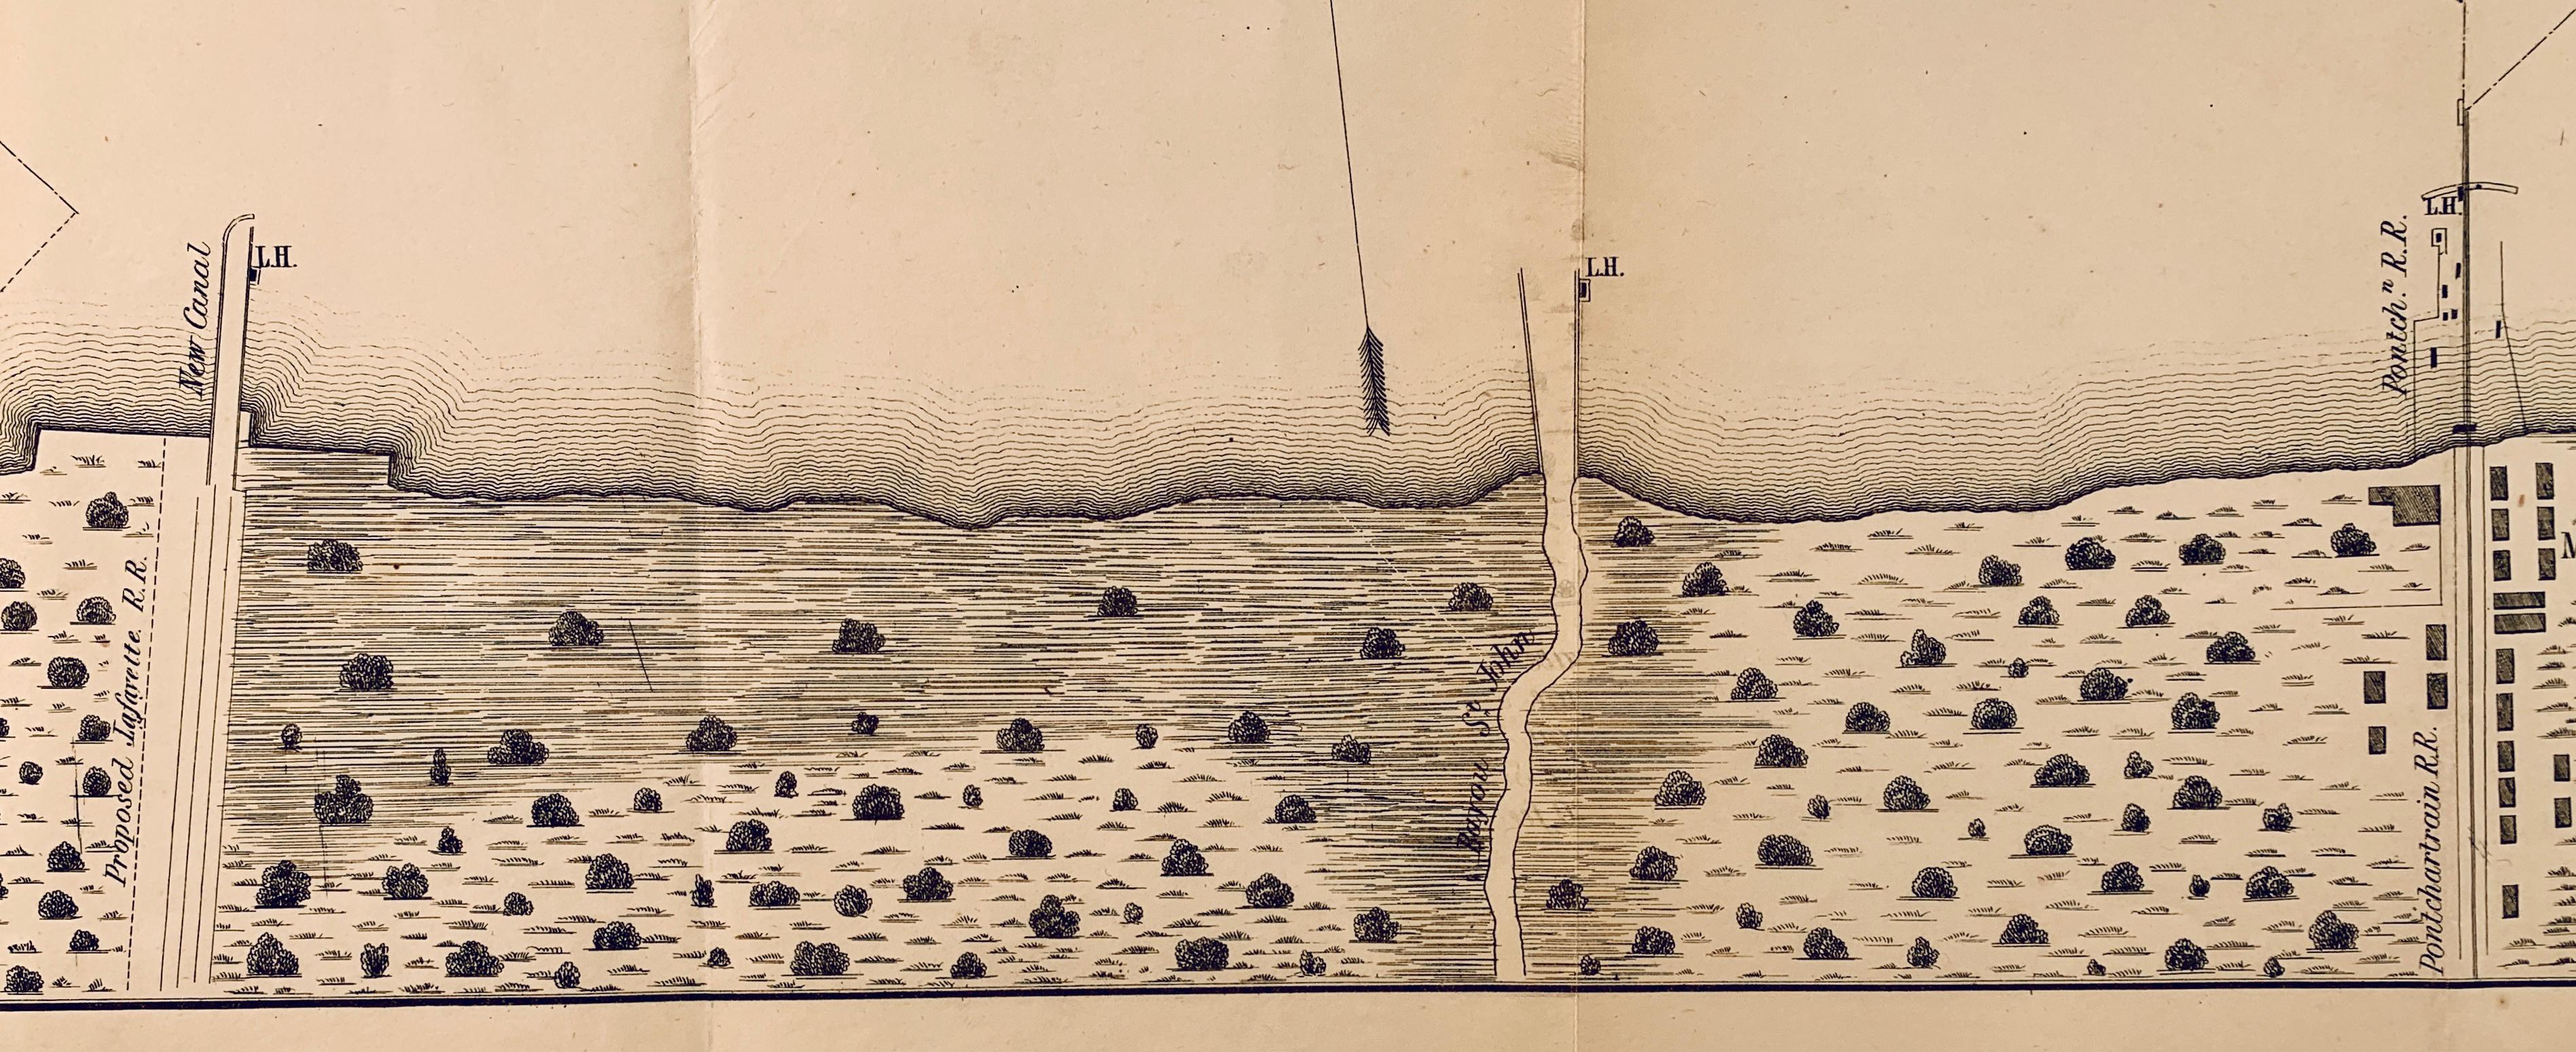 Original 1853 engraving of a plan of the southern shore of Lake Ponchartrain in New Orleans, Louisiana. The plan shows projected construction of wooden breakwaters in the lake that were designed 